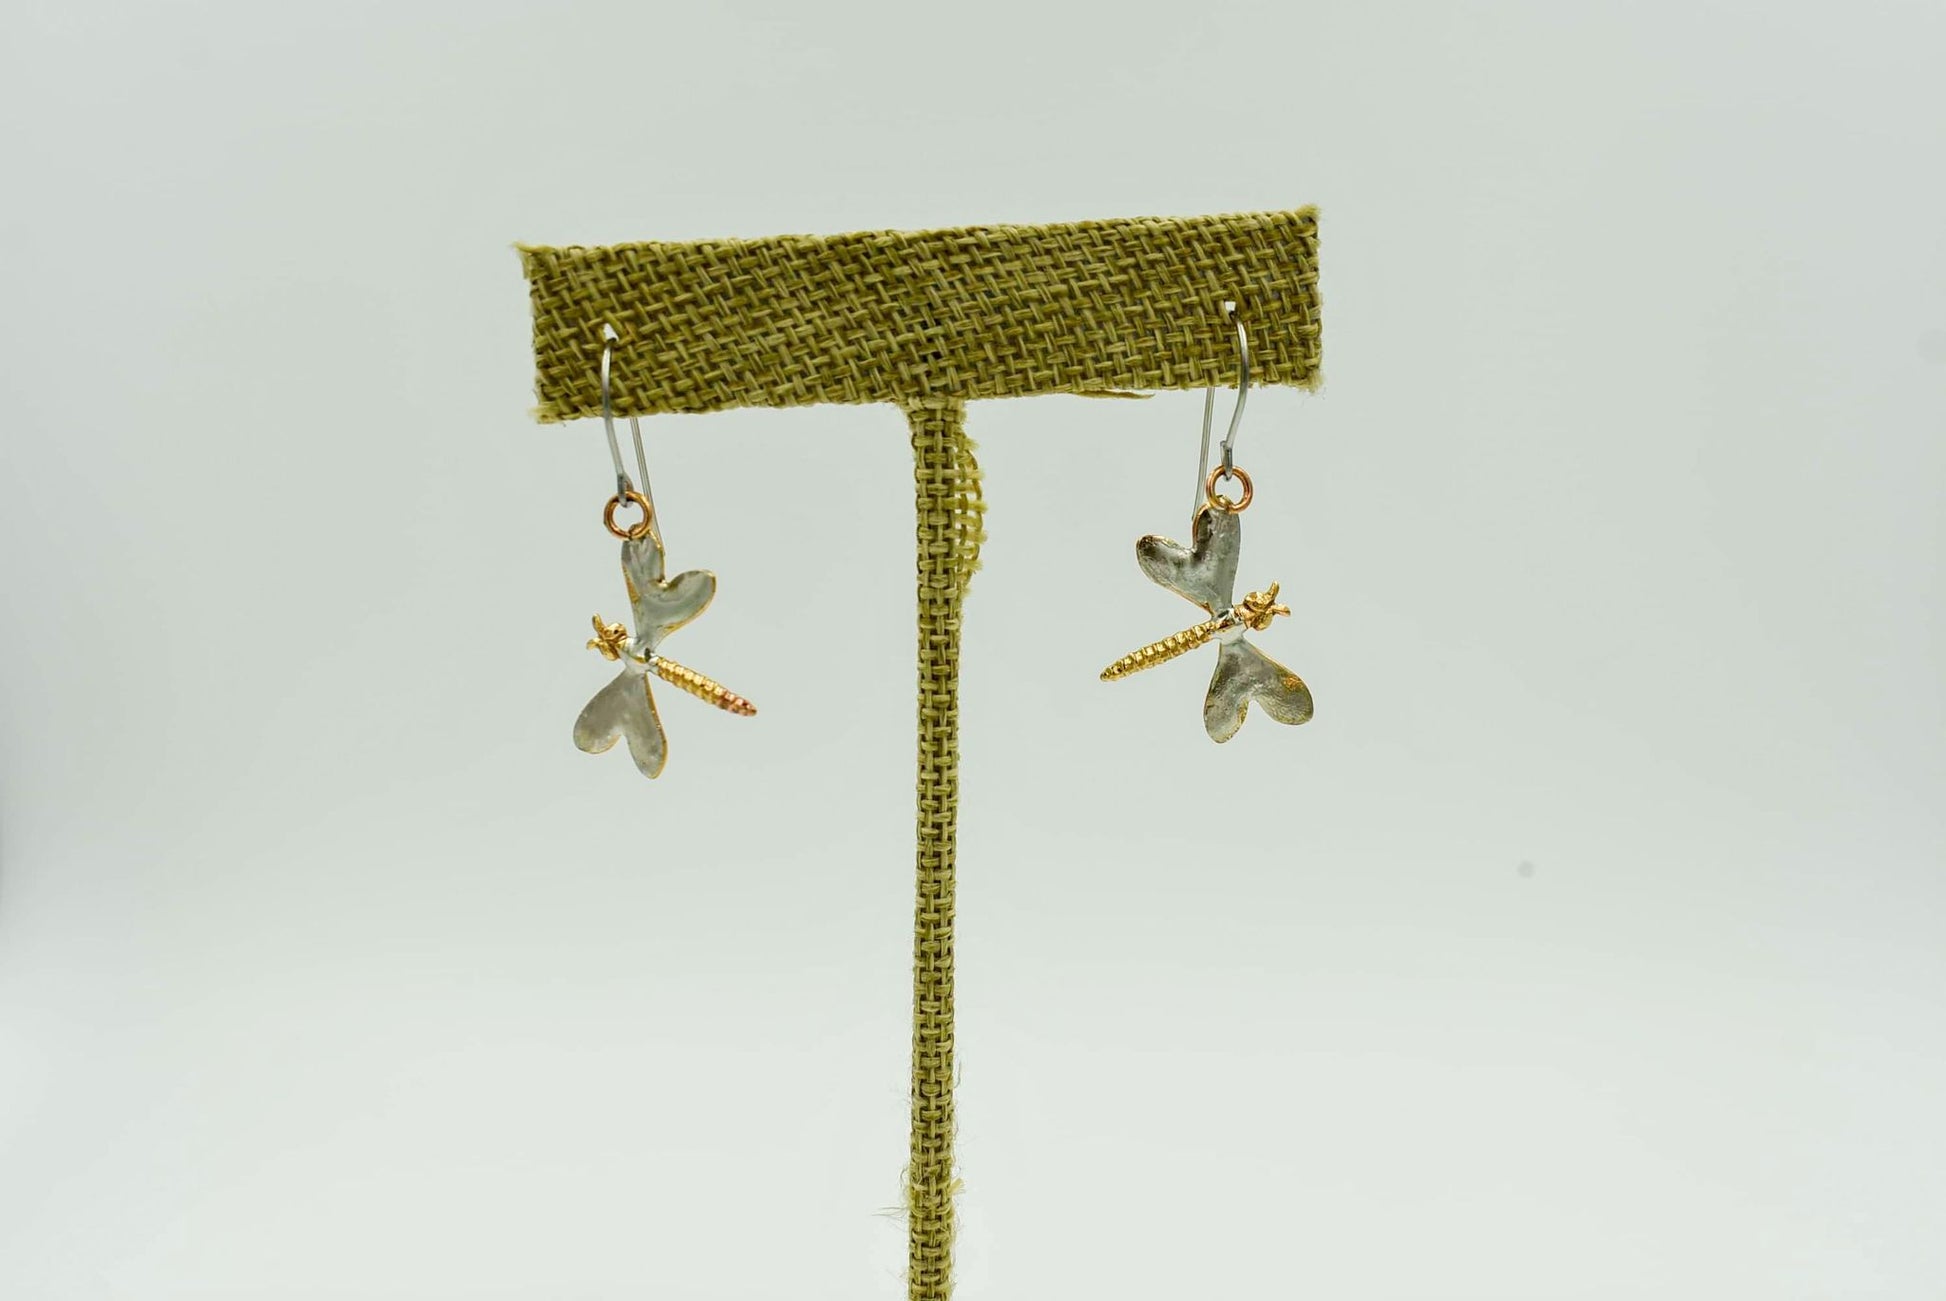 Small Dragonfly Earrings that measure 2" down. Made from brass bronze and copper with sterling silver wire back